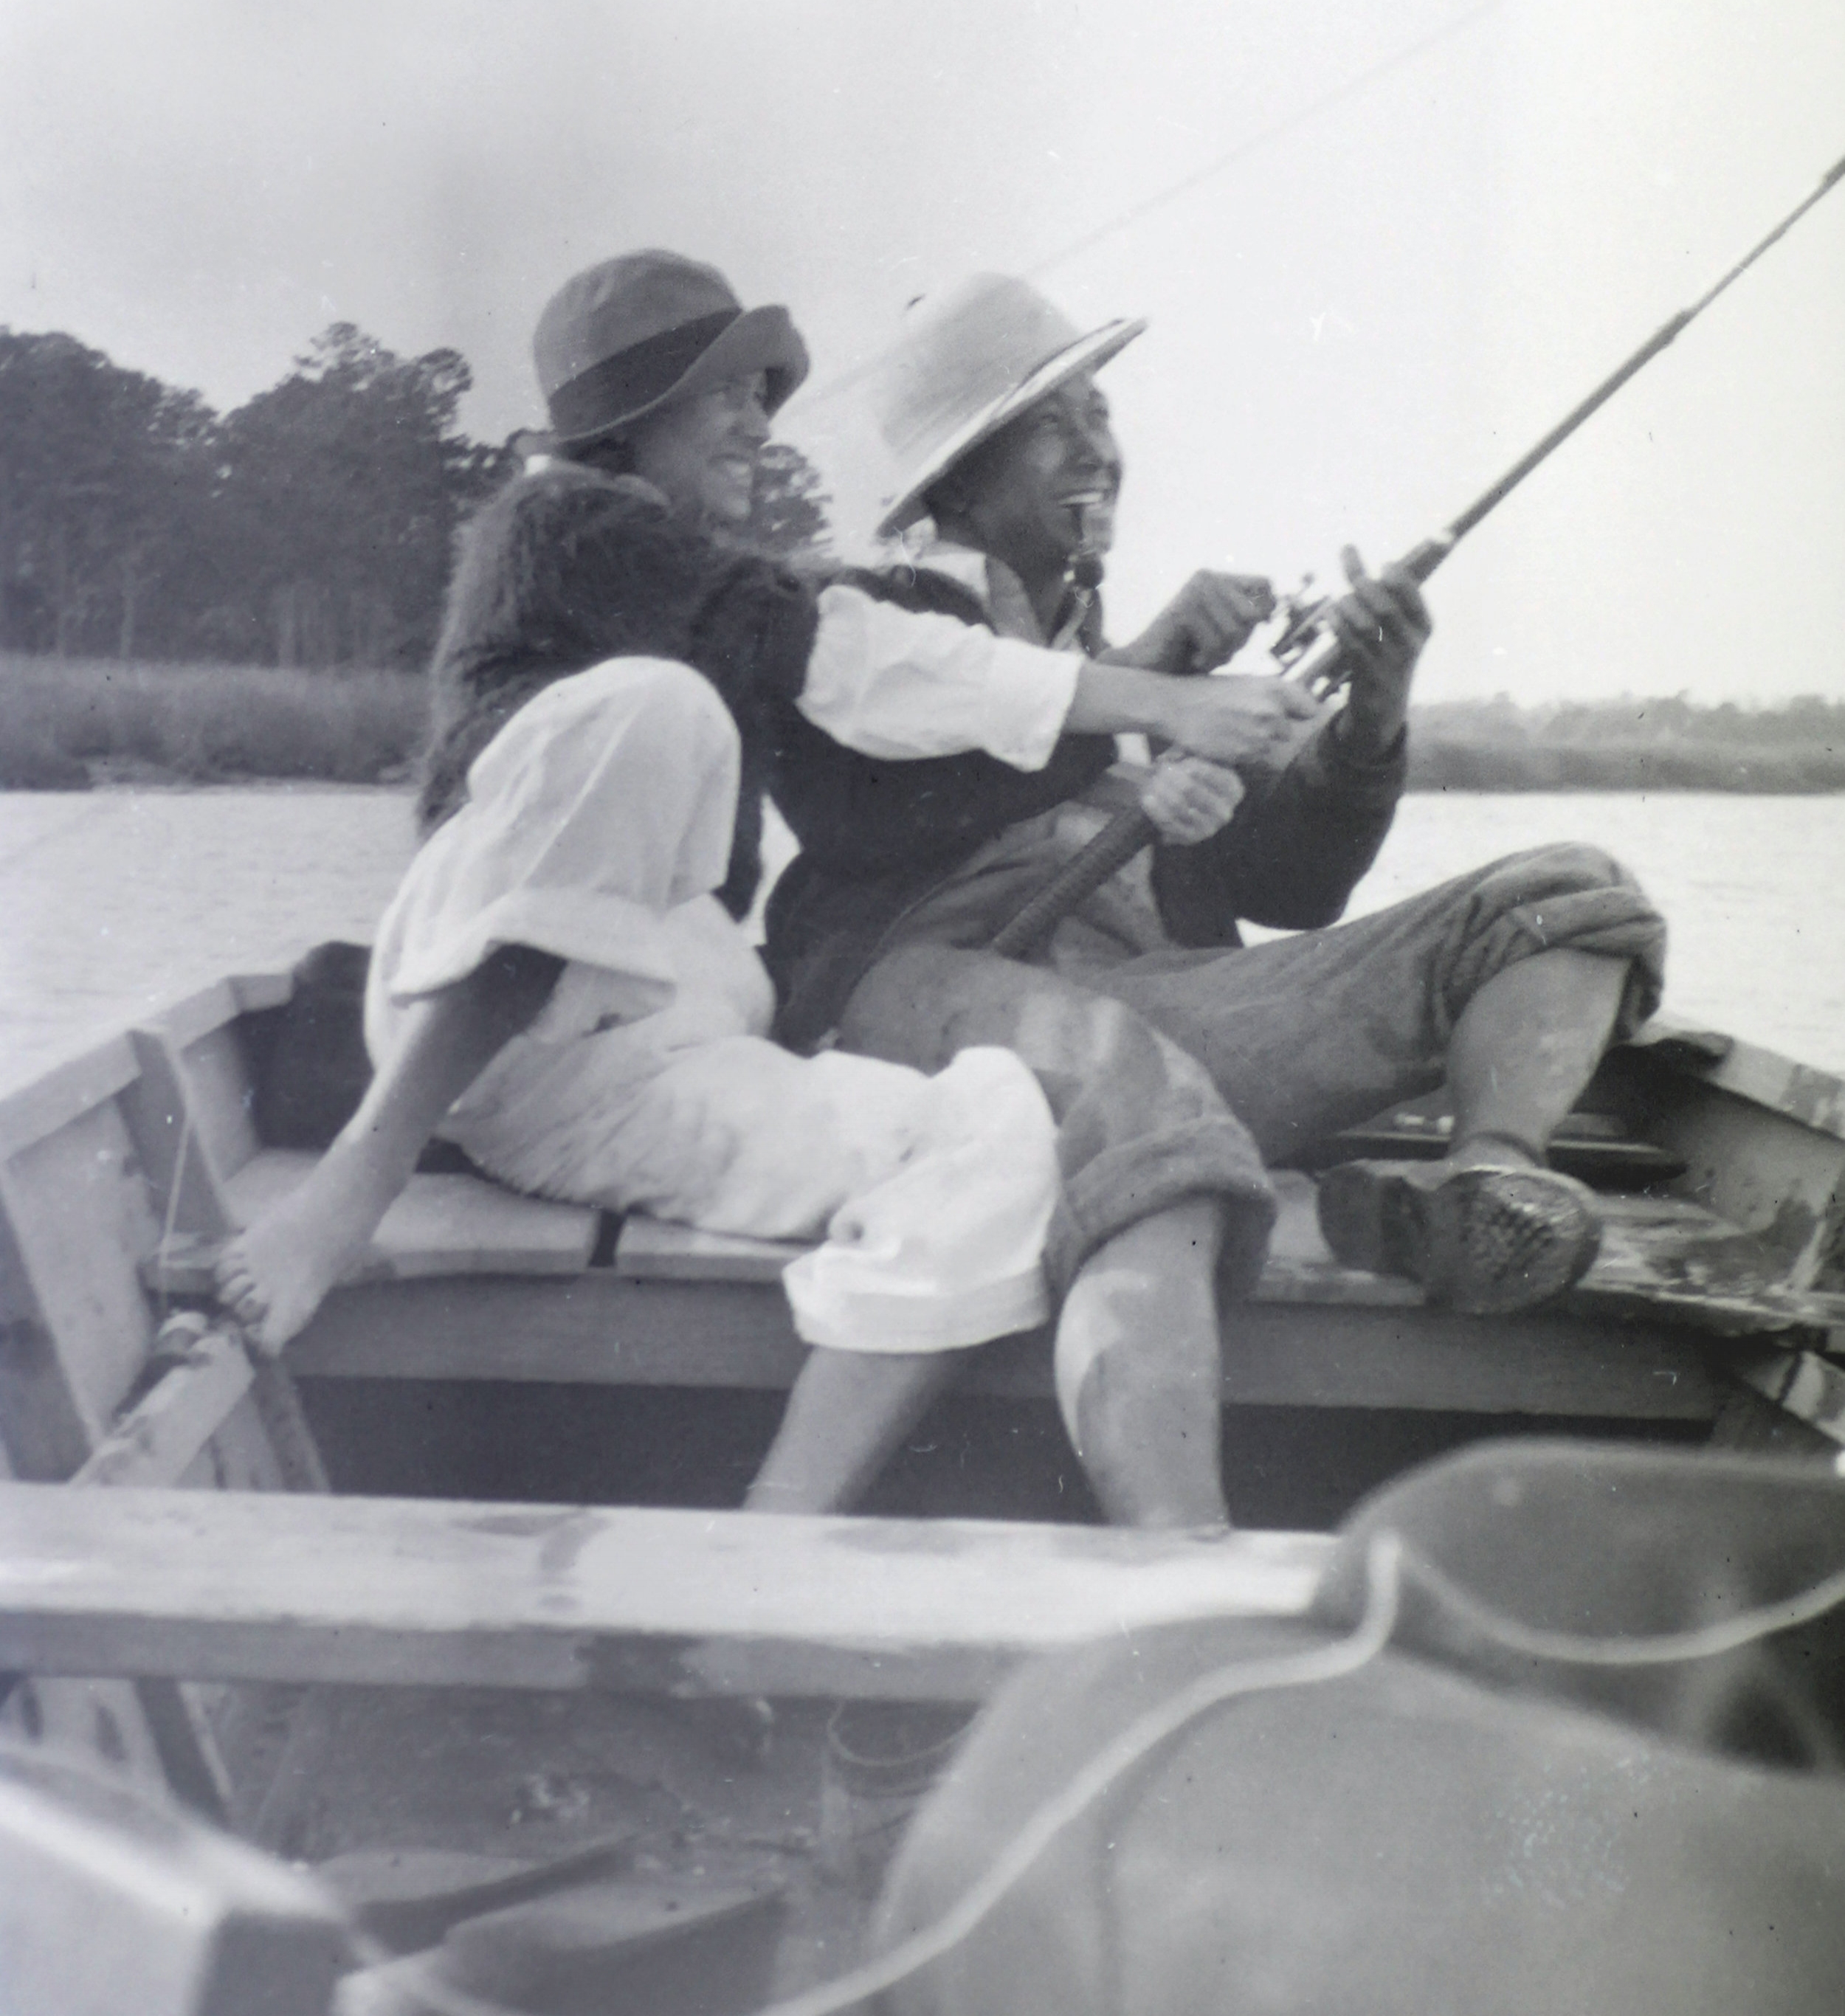 Fishing with his sister-in-law, Merle, in halcyon pre-War days, ca. 1935